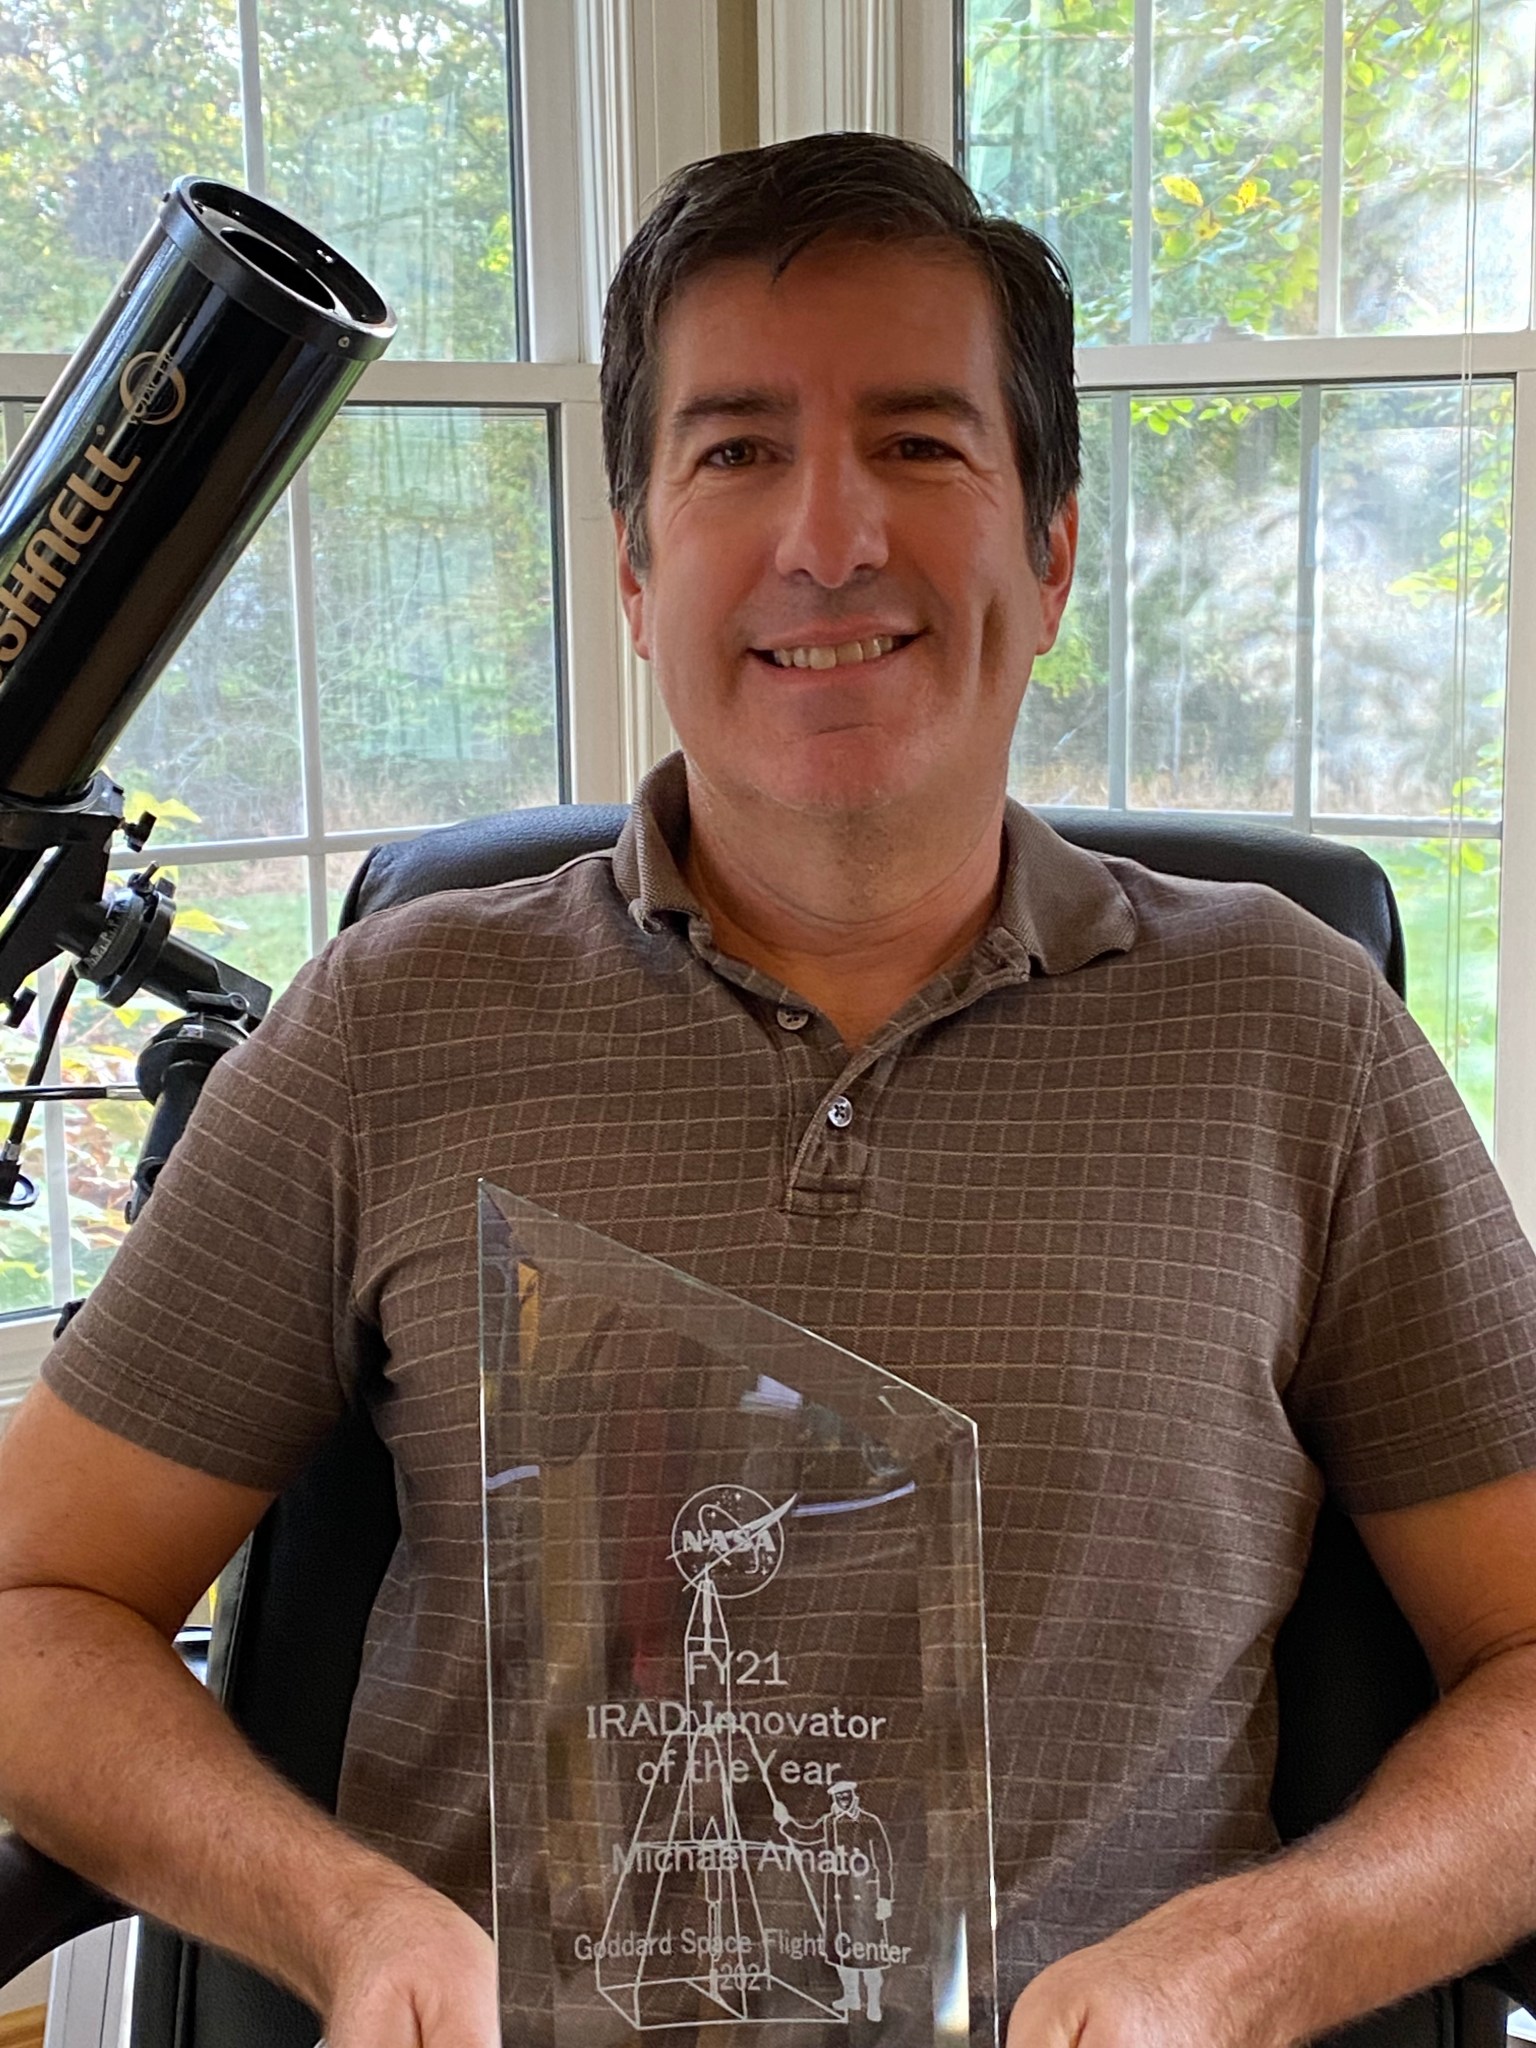 man in front of window  with award